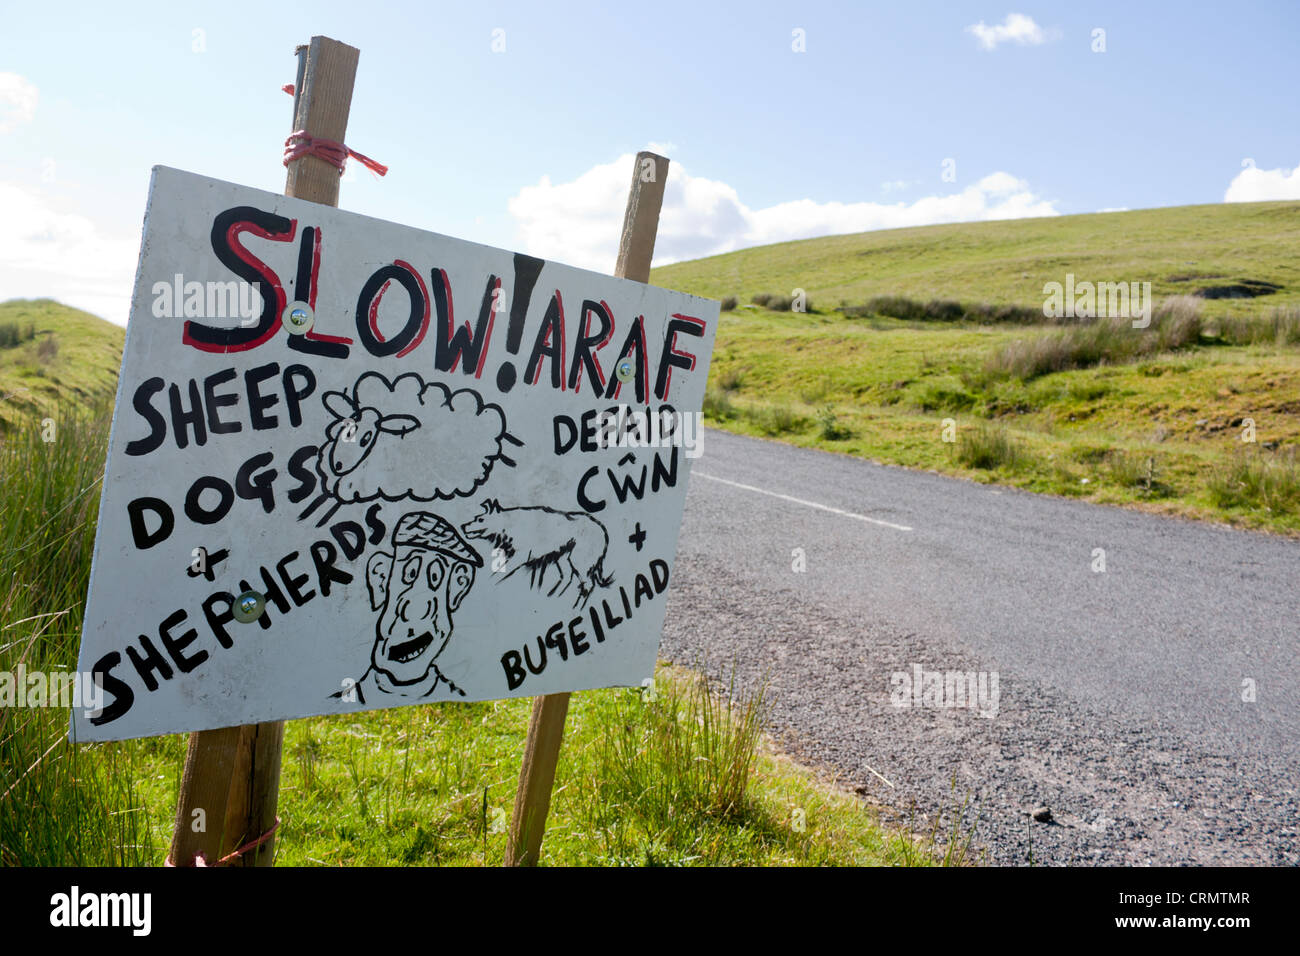 Slow Araf humorous handpainted sign by side of Welsh mountain road warning to beware of sheep, dogs and shepherds Powys Wales UK Stock Photo